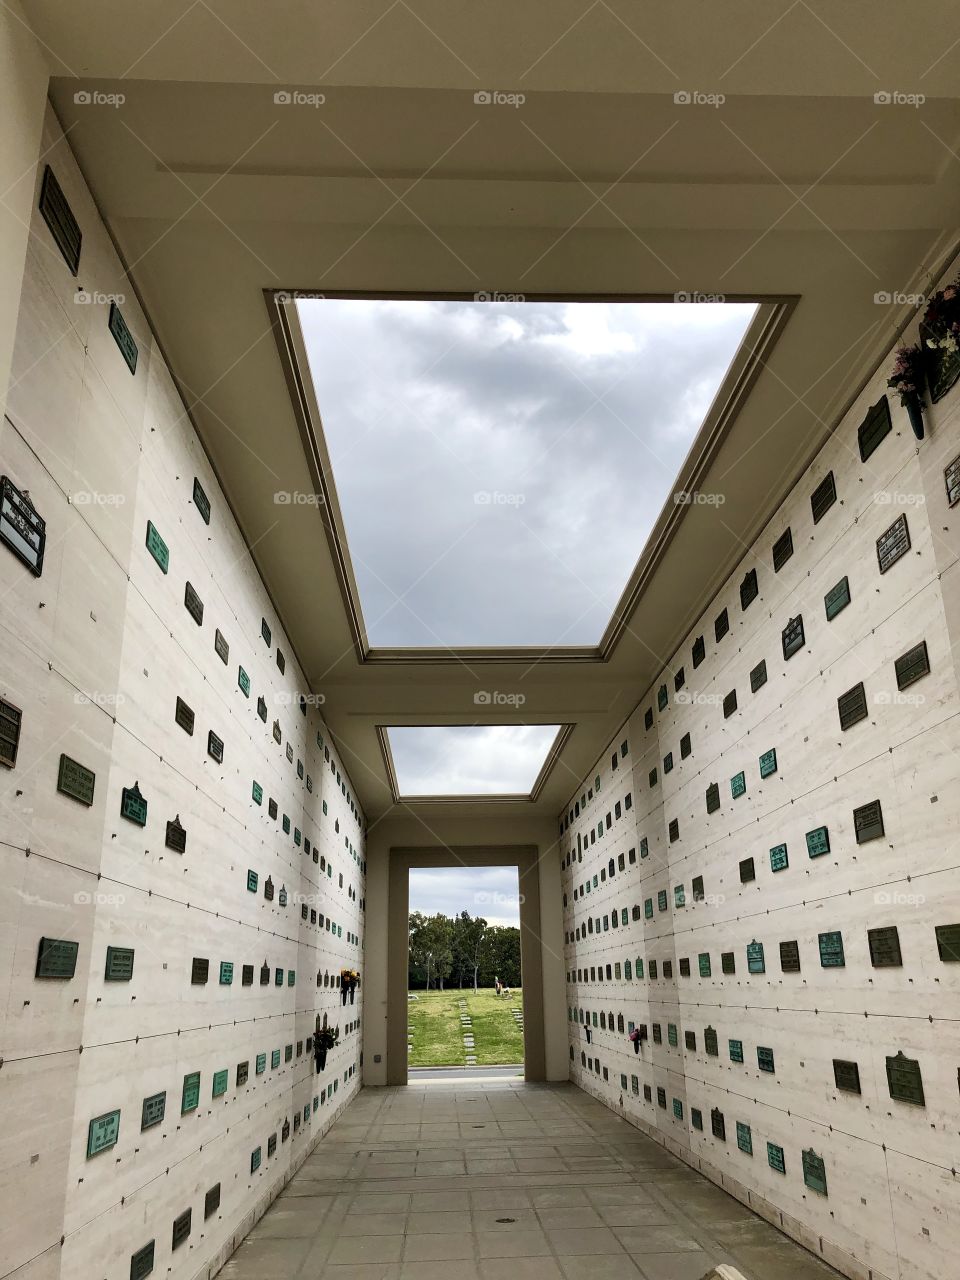 Memorial walls with sky view of clouds.